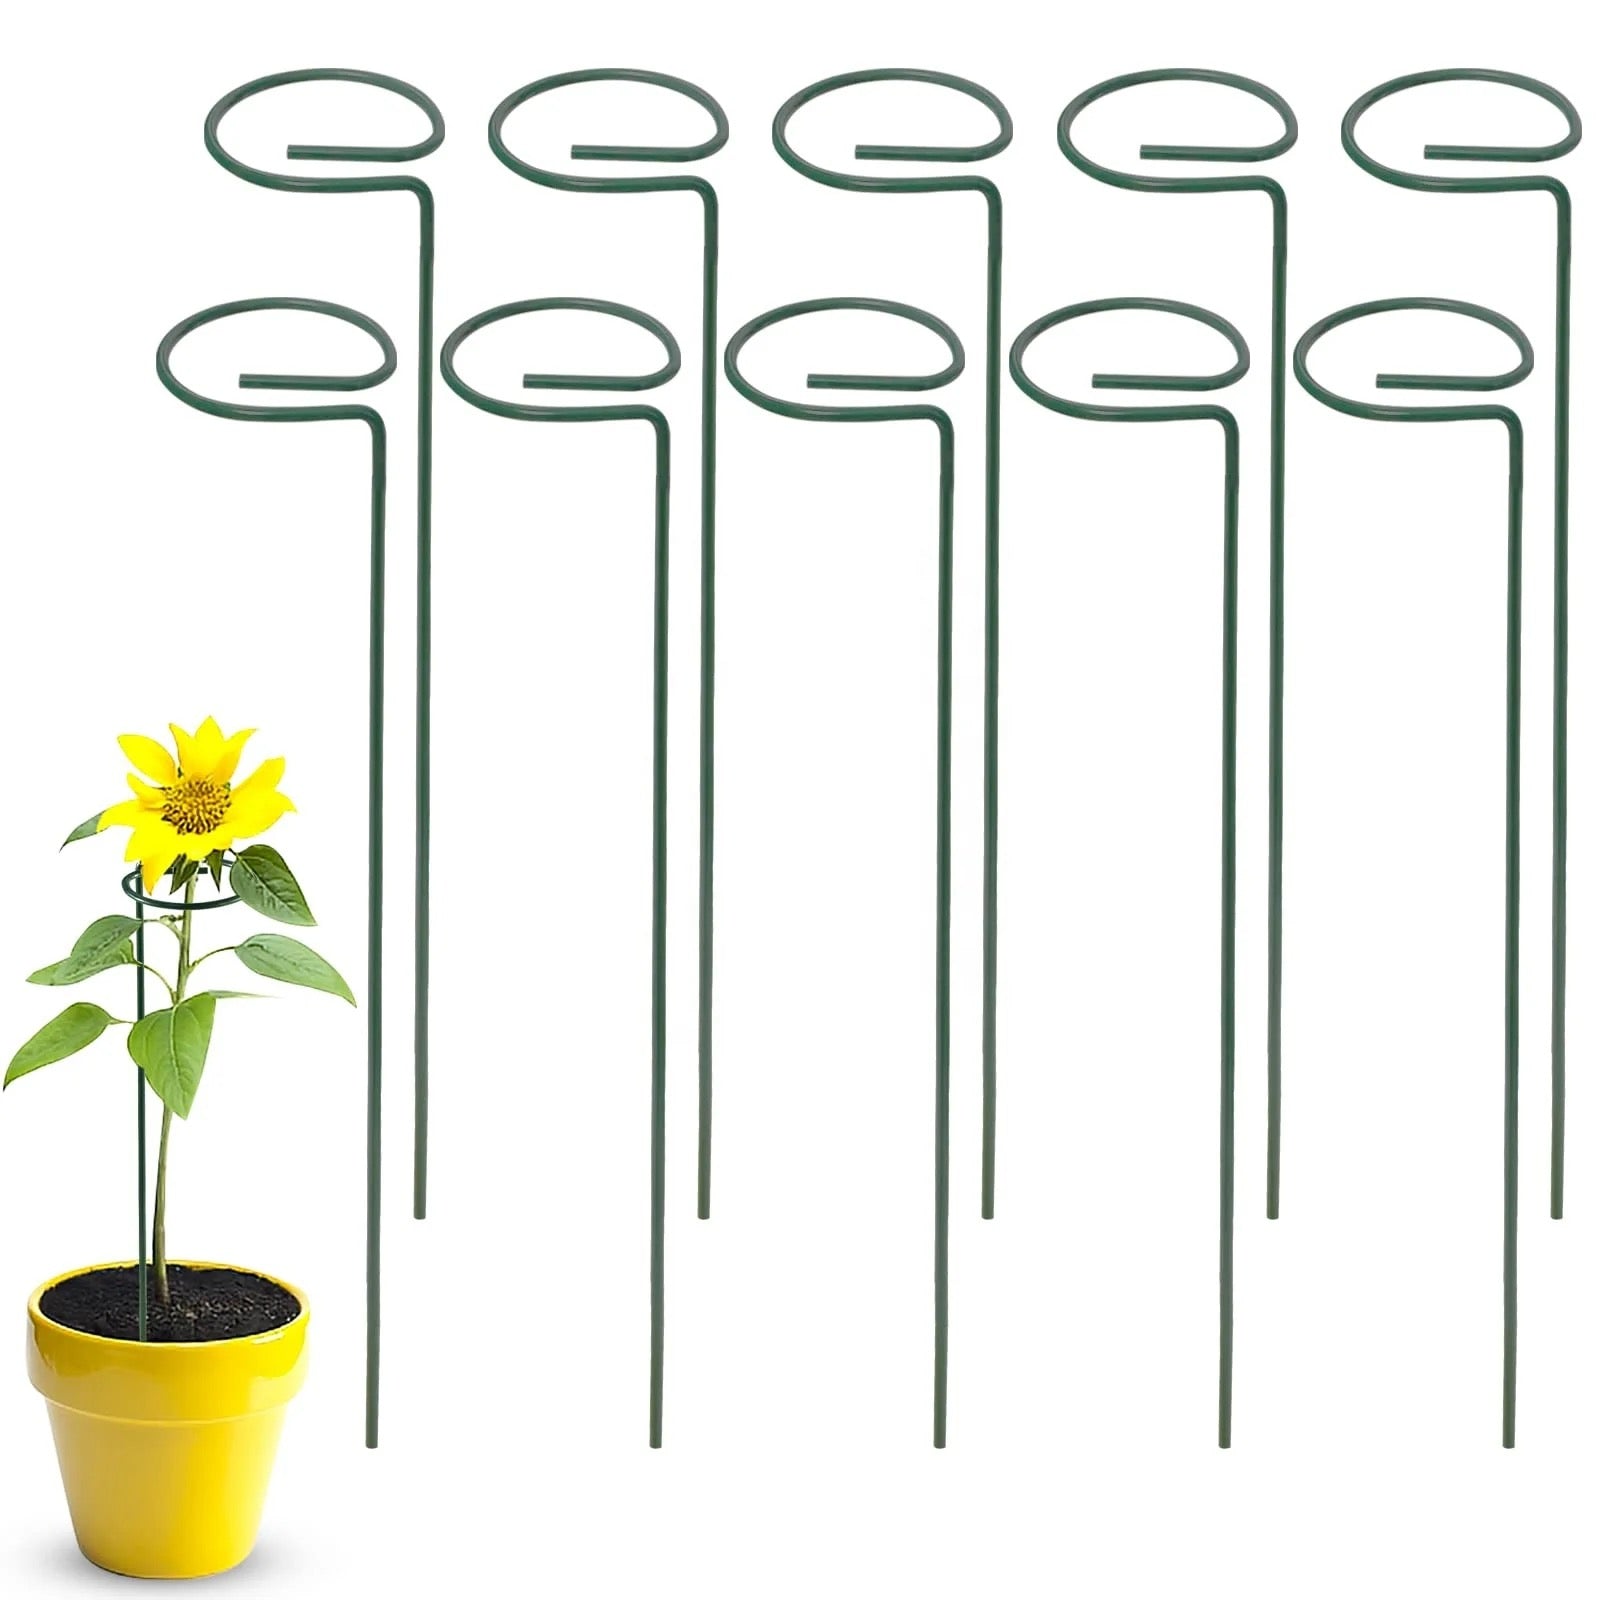 10 Metal Garden Plant Support Stakes